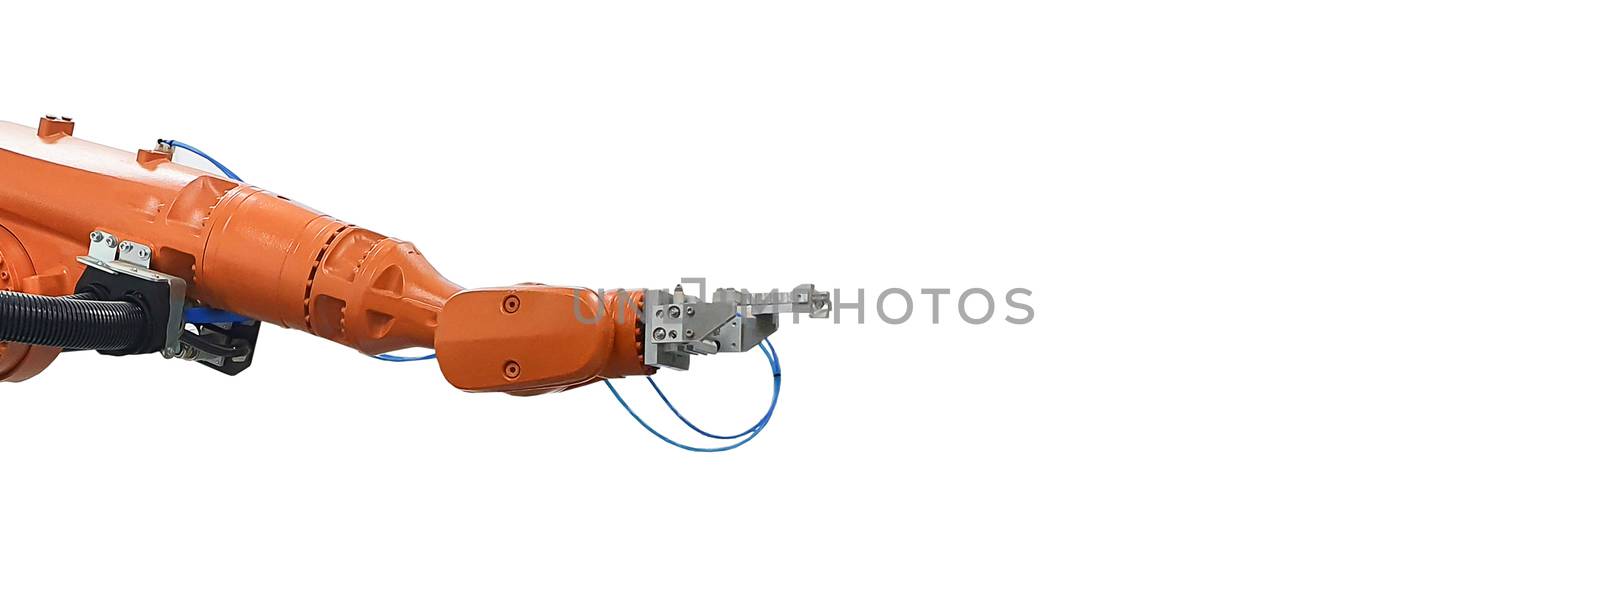 Industrial robot mechanical arm on white background